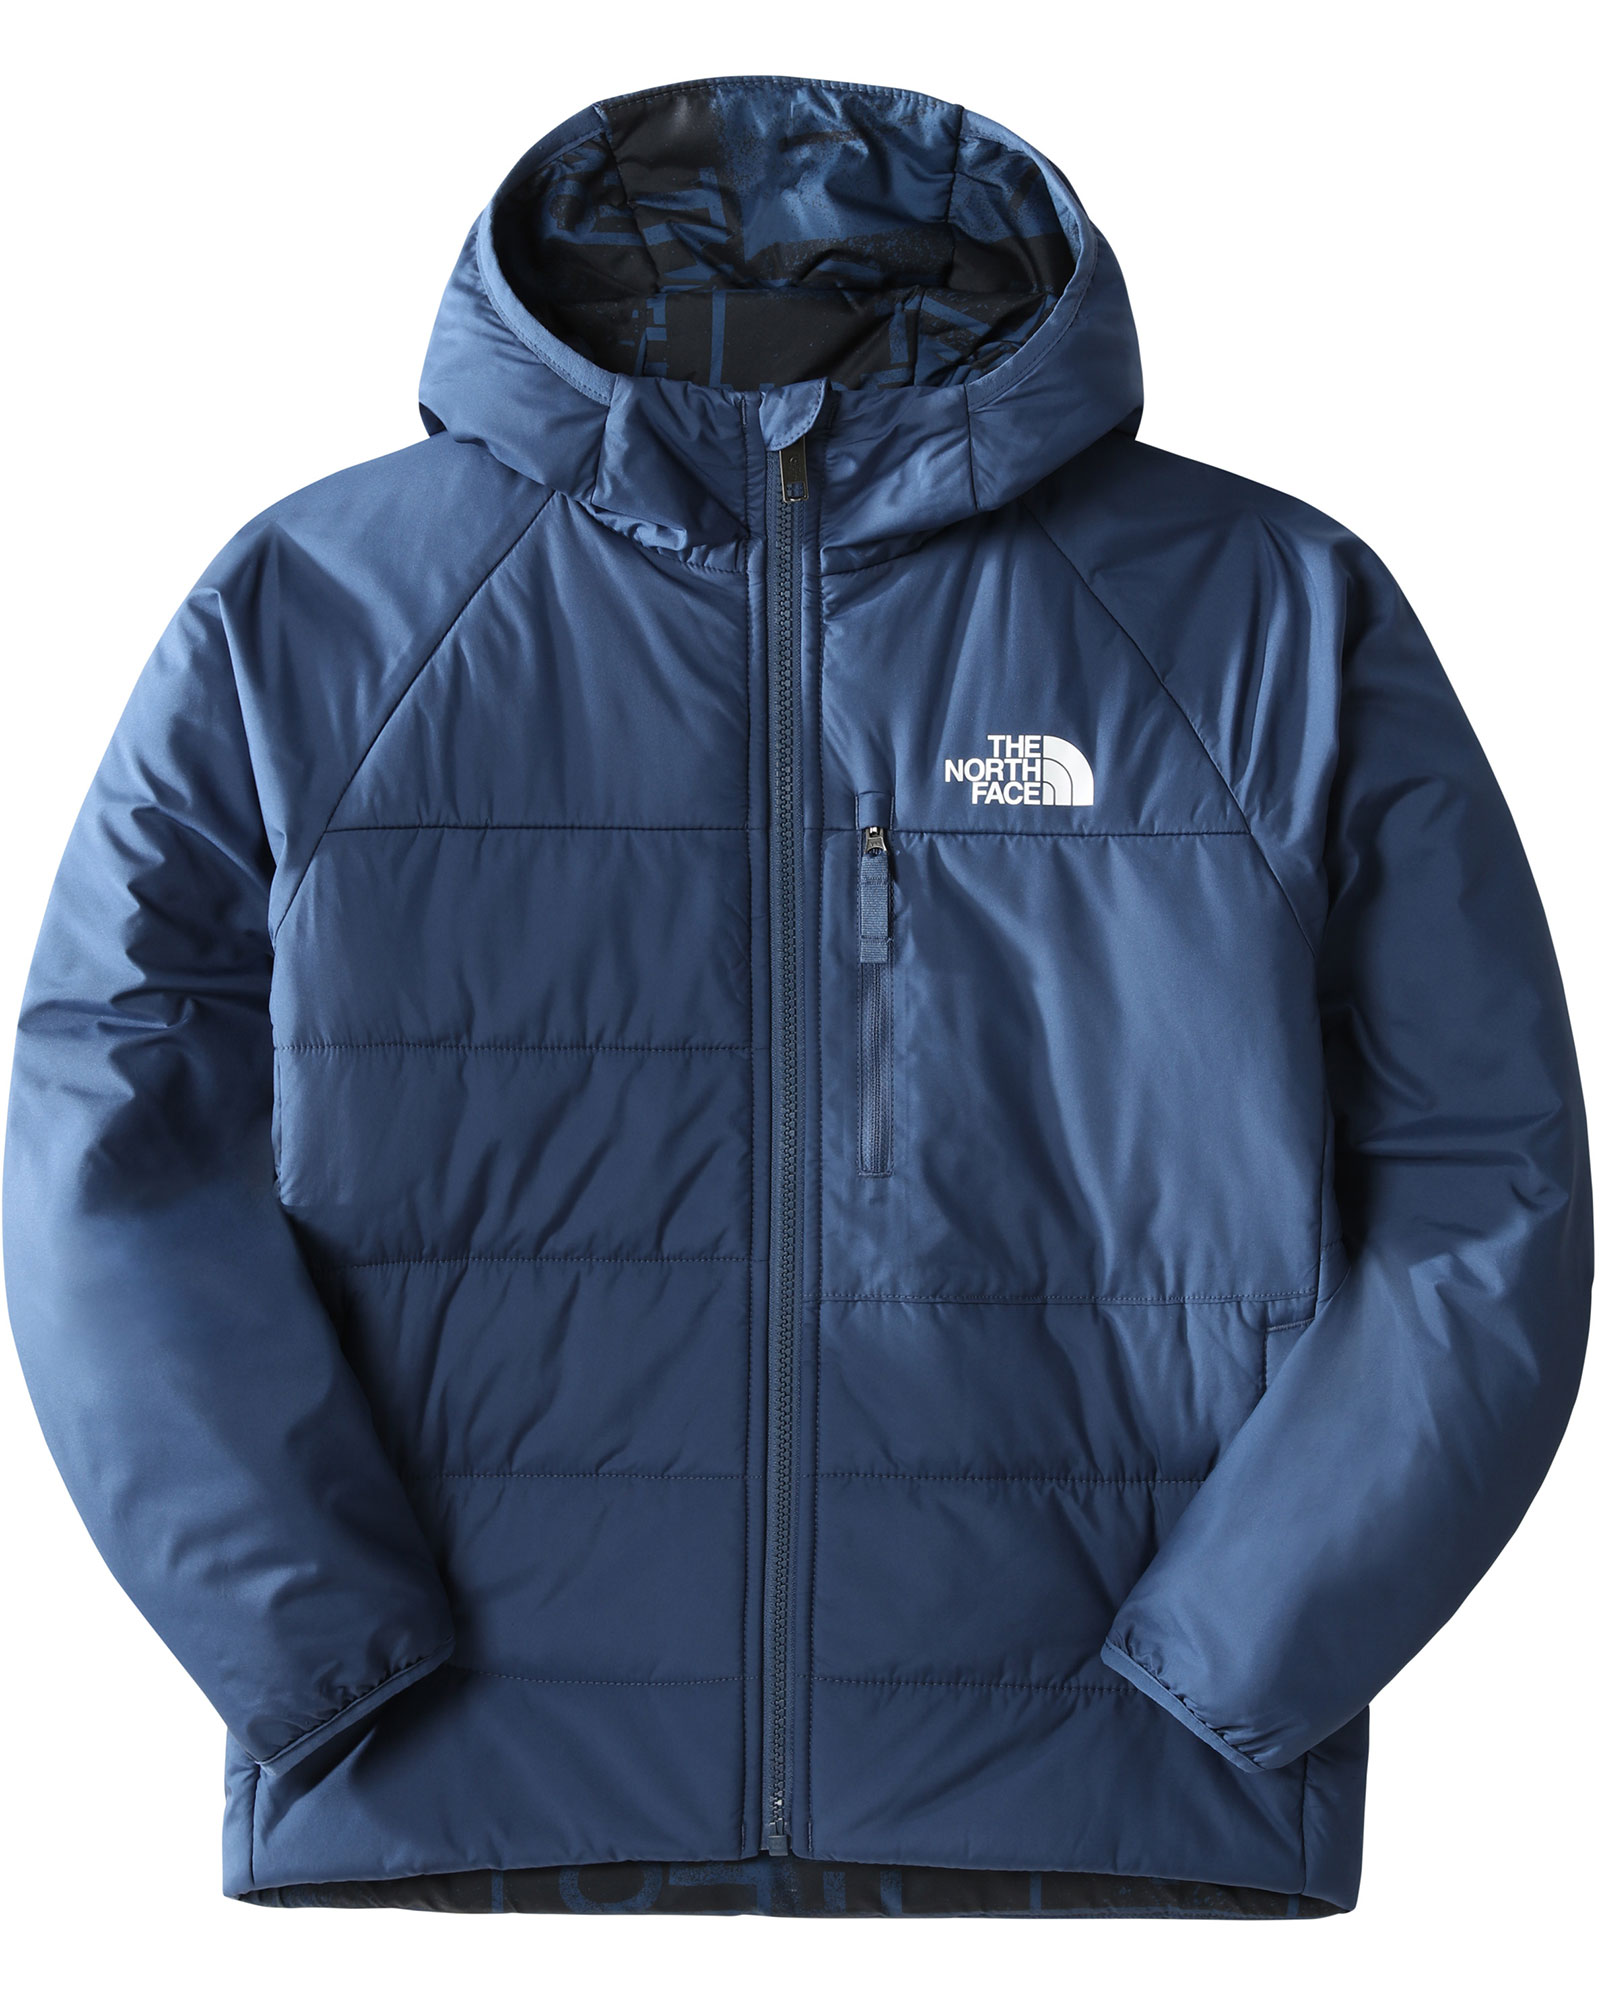 Product image of The North Face Reversible Perrito Kids' Jacket